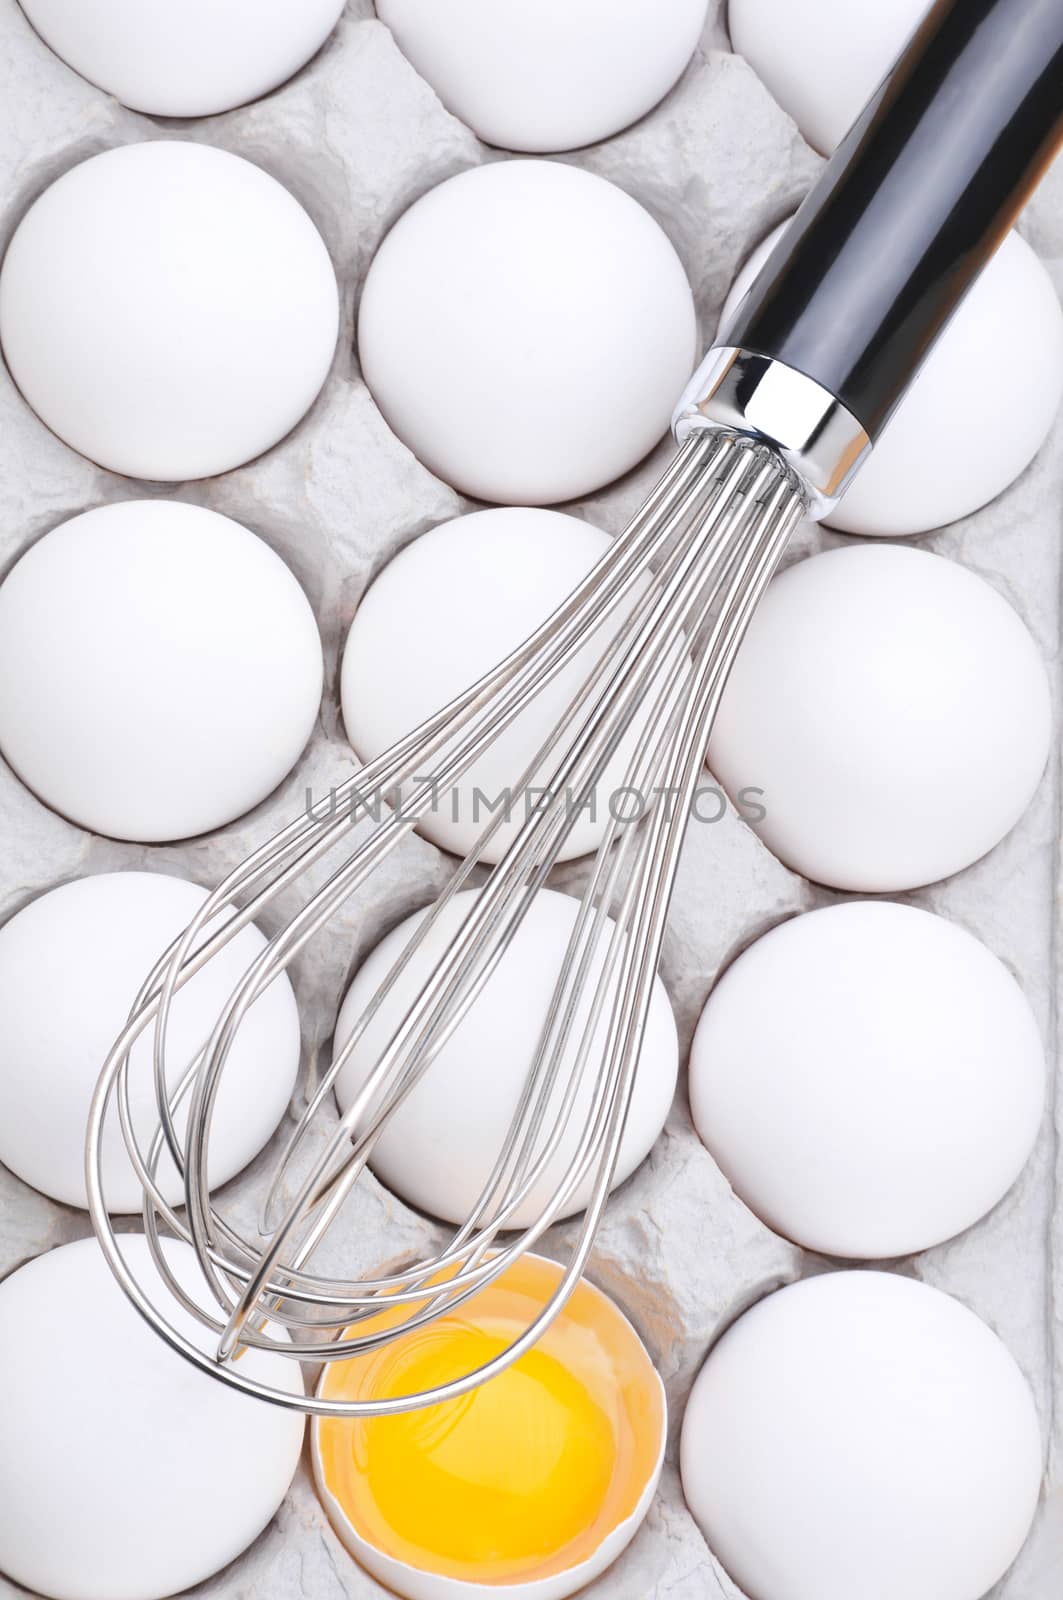 Whisk Laying Across a Carton of Eggs by sCukrov